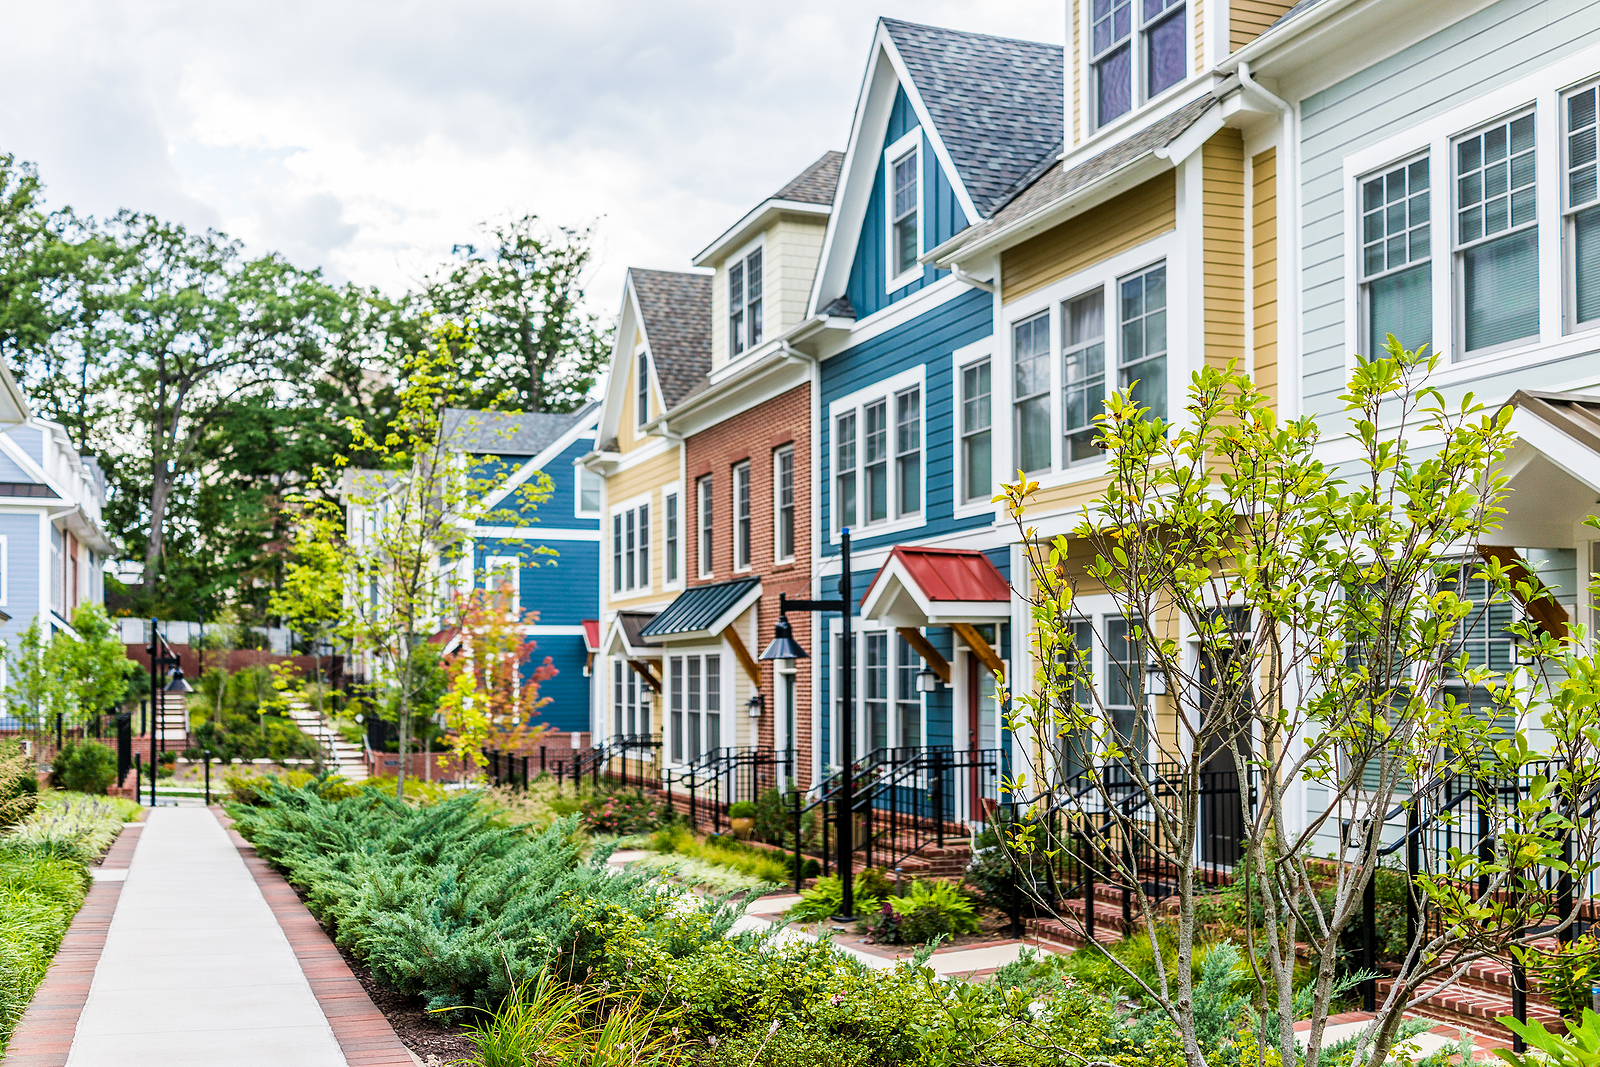 Row of colorful red yellow blue white green painted residential townhouses homes houses with brick patio gardens in summer